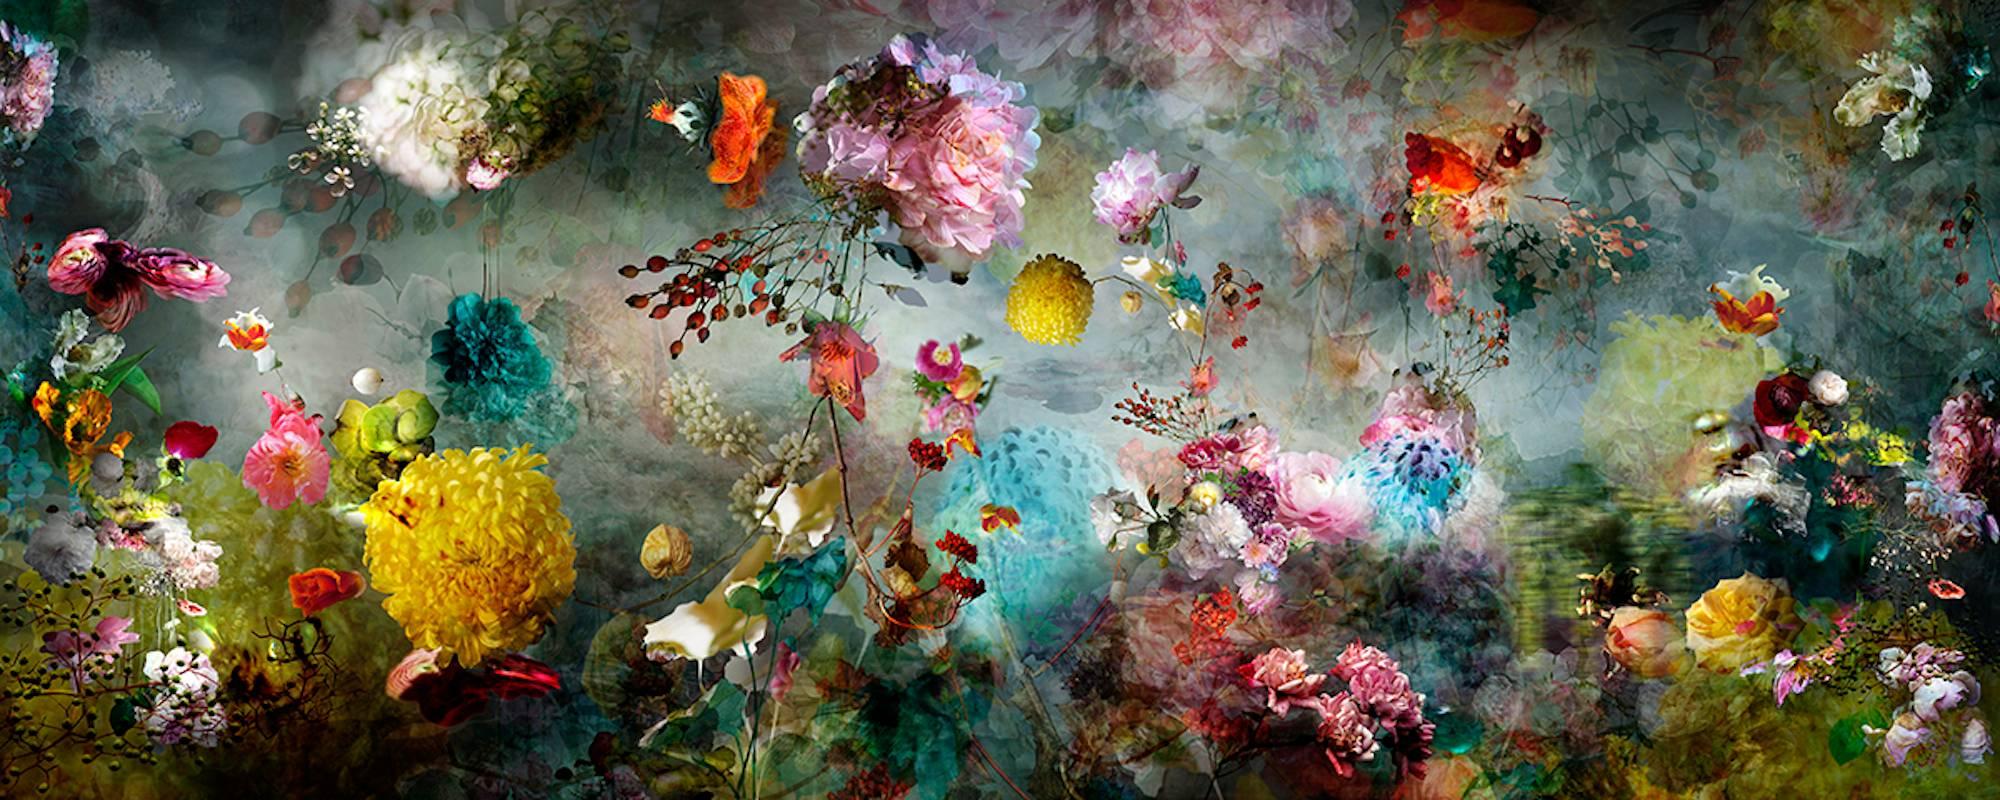 Isabelle Menin Color Photograph - Song  #12 colorful abstract floral landscape still life photo blue, pink, yellow